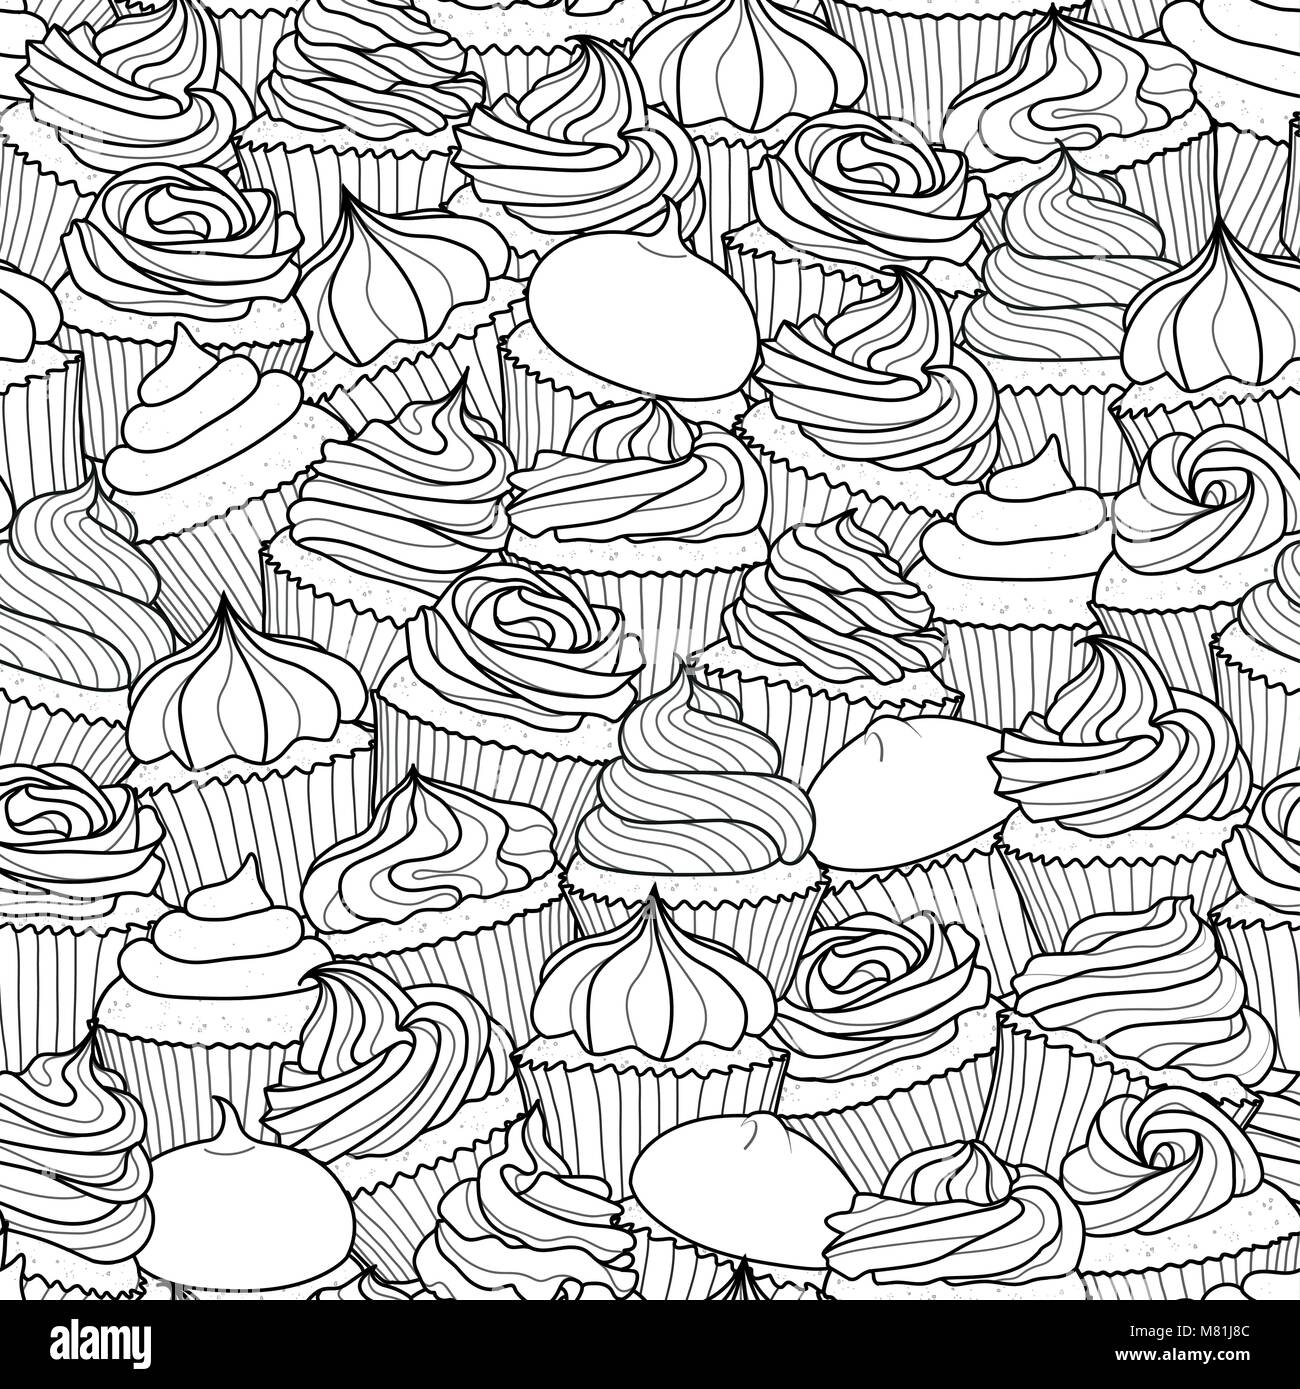 Various cupcakes random on white background. Cute hand drawn seamless pattern of dessert in black outline style. Stock Vector